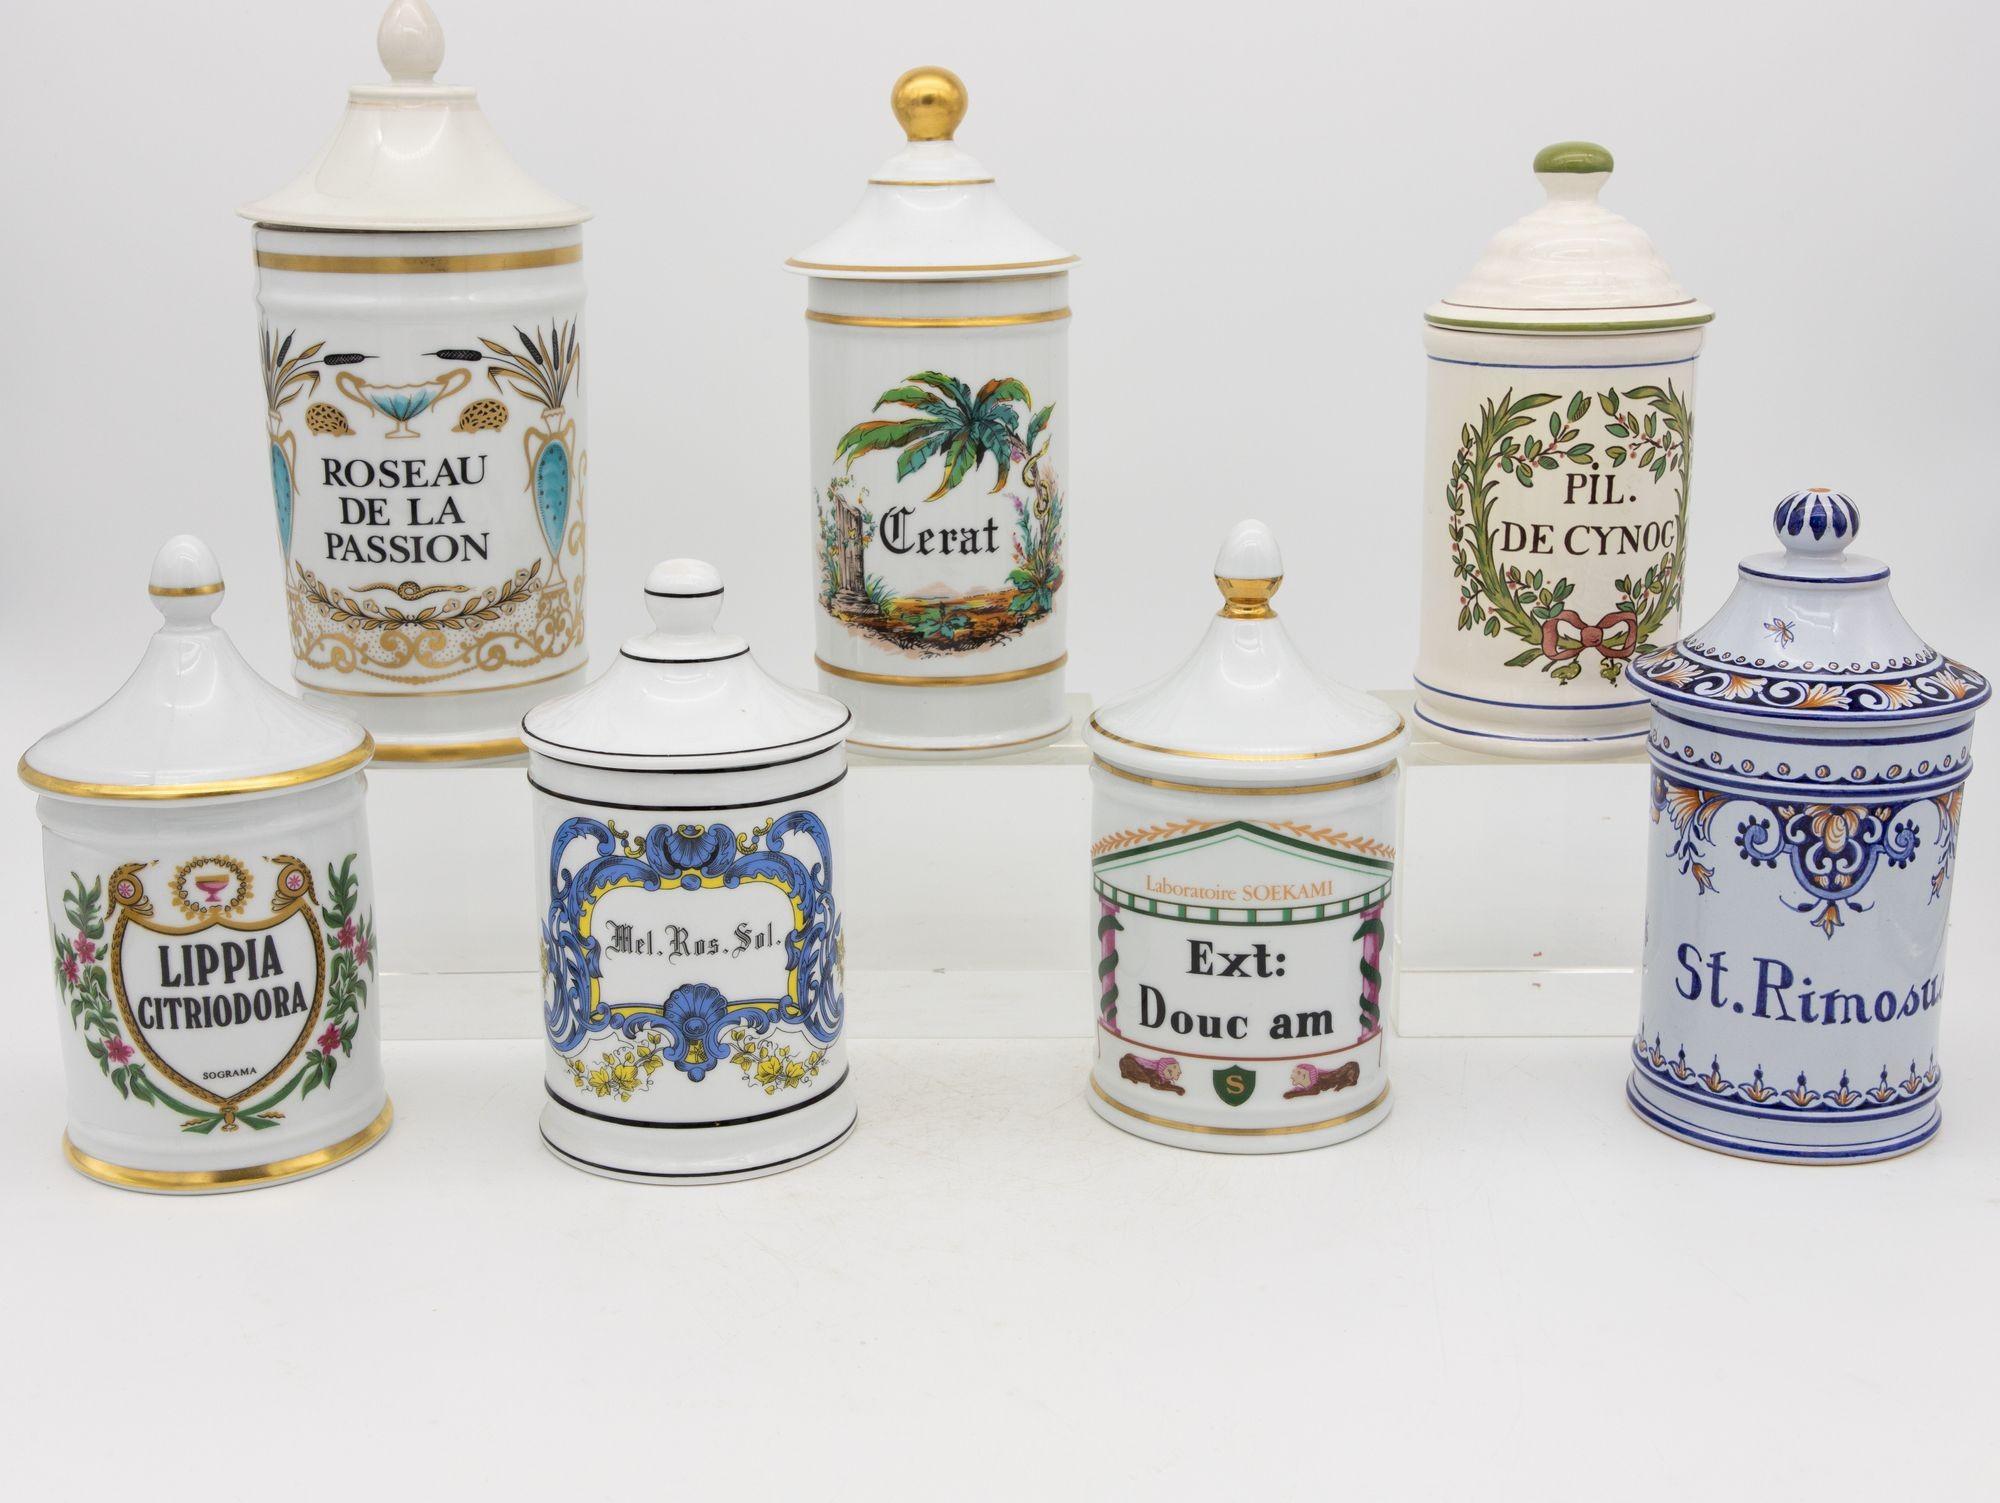 A collection of seven apothecary jars in french styles. Each painted apothecary or pharmacy jar has a name and unique design painted on it. The collection is mid-20th century and each has its lid. The smallest measures 4